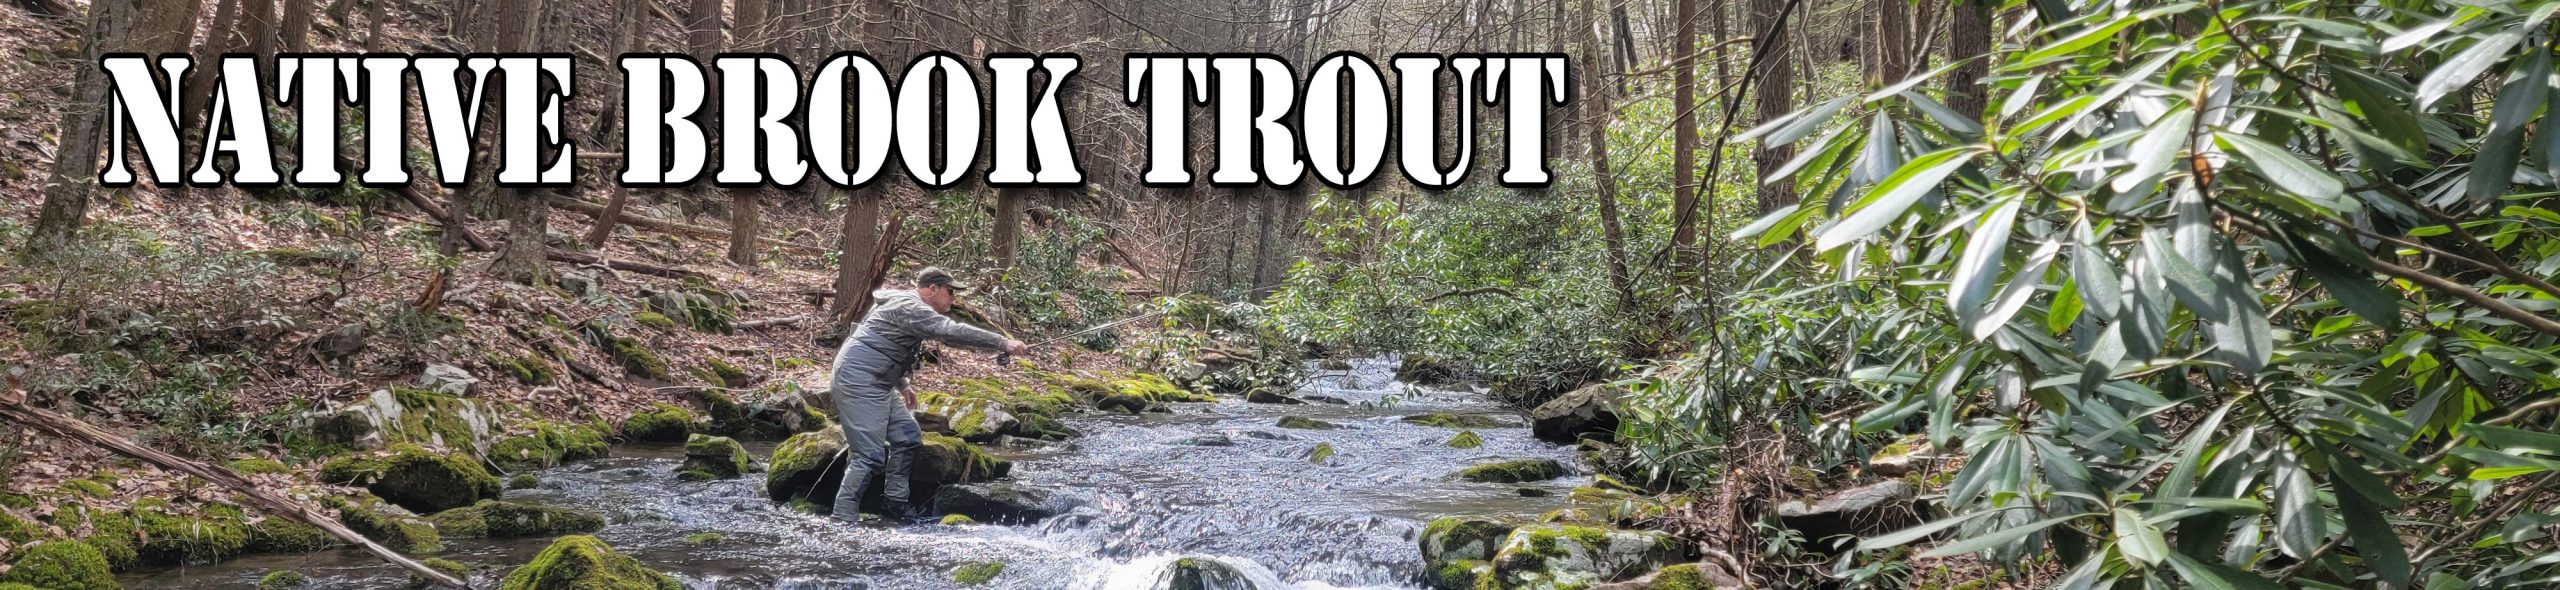 Ask Us About Our Native Brook Trout Fishing Trips. Enjoy A Day Out Or An Overnight Packaged Trip Pursuing These Small Gems Of PA. We Spend A Day Brook Trout Fishing These Mountain Streams In Central And Eastern PA.